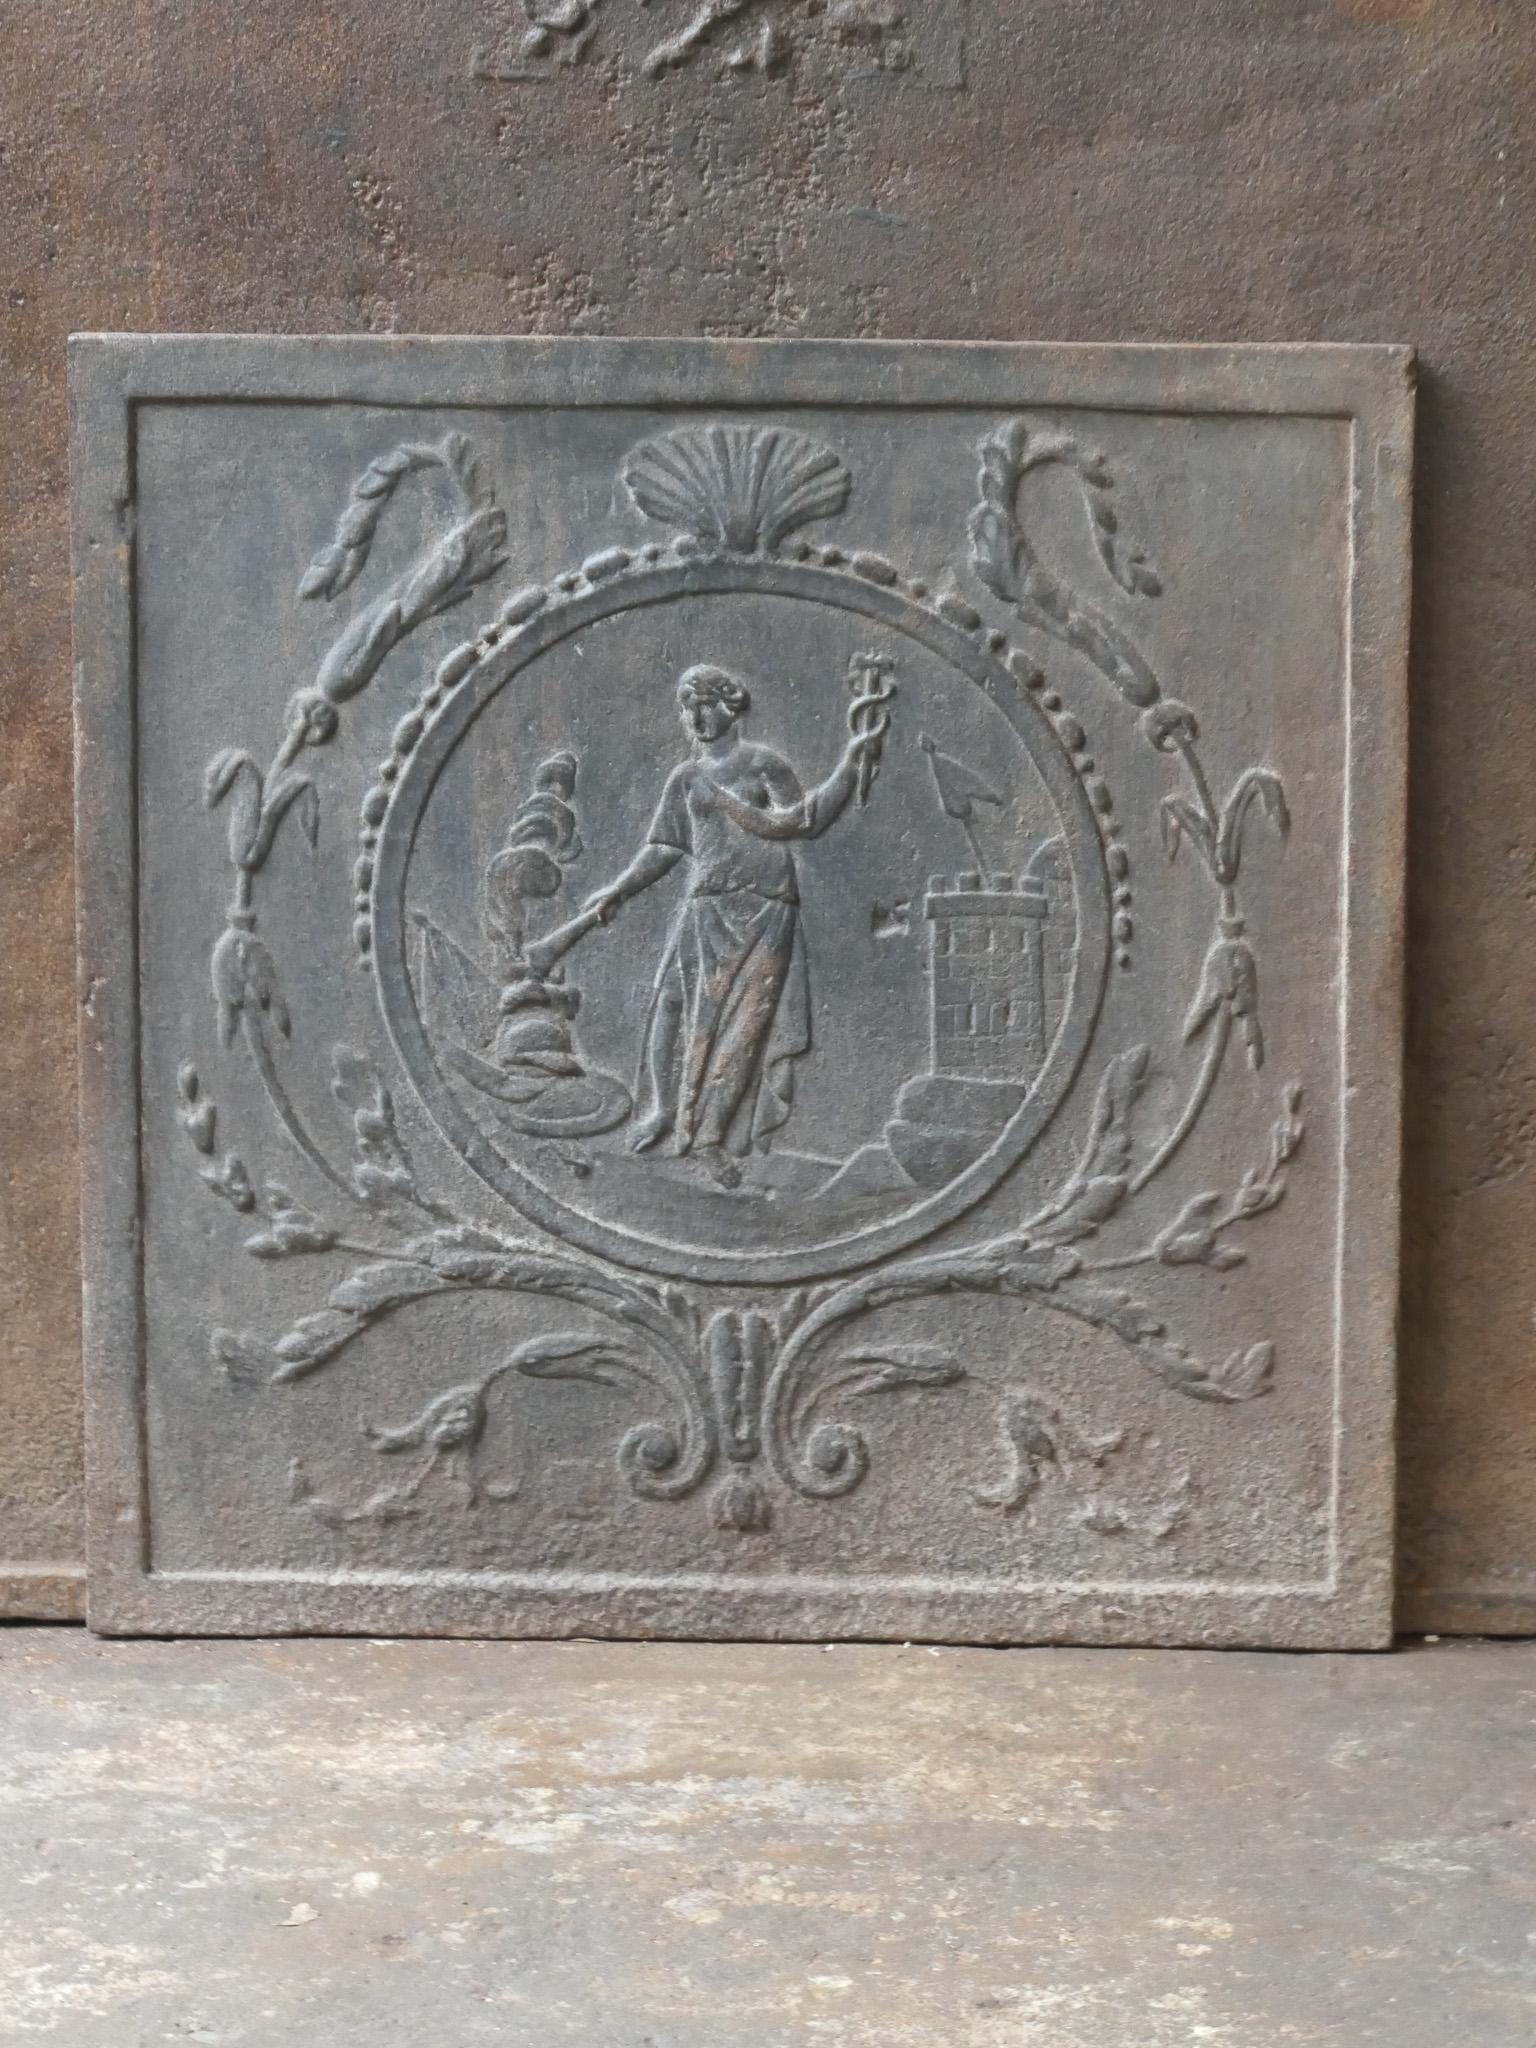 20th Century French Neoclassical Style fireback / backplash with the goddess Hestia.

The torch is the symbol of Hestia, goddess of fire and more specifically the domestic hearth. Where no fire is found, a cozy, regulated society is impossible.